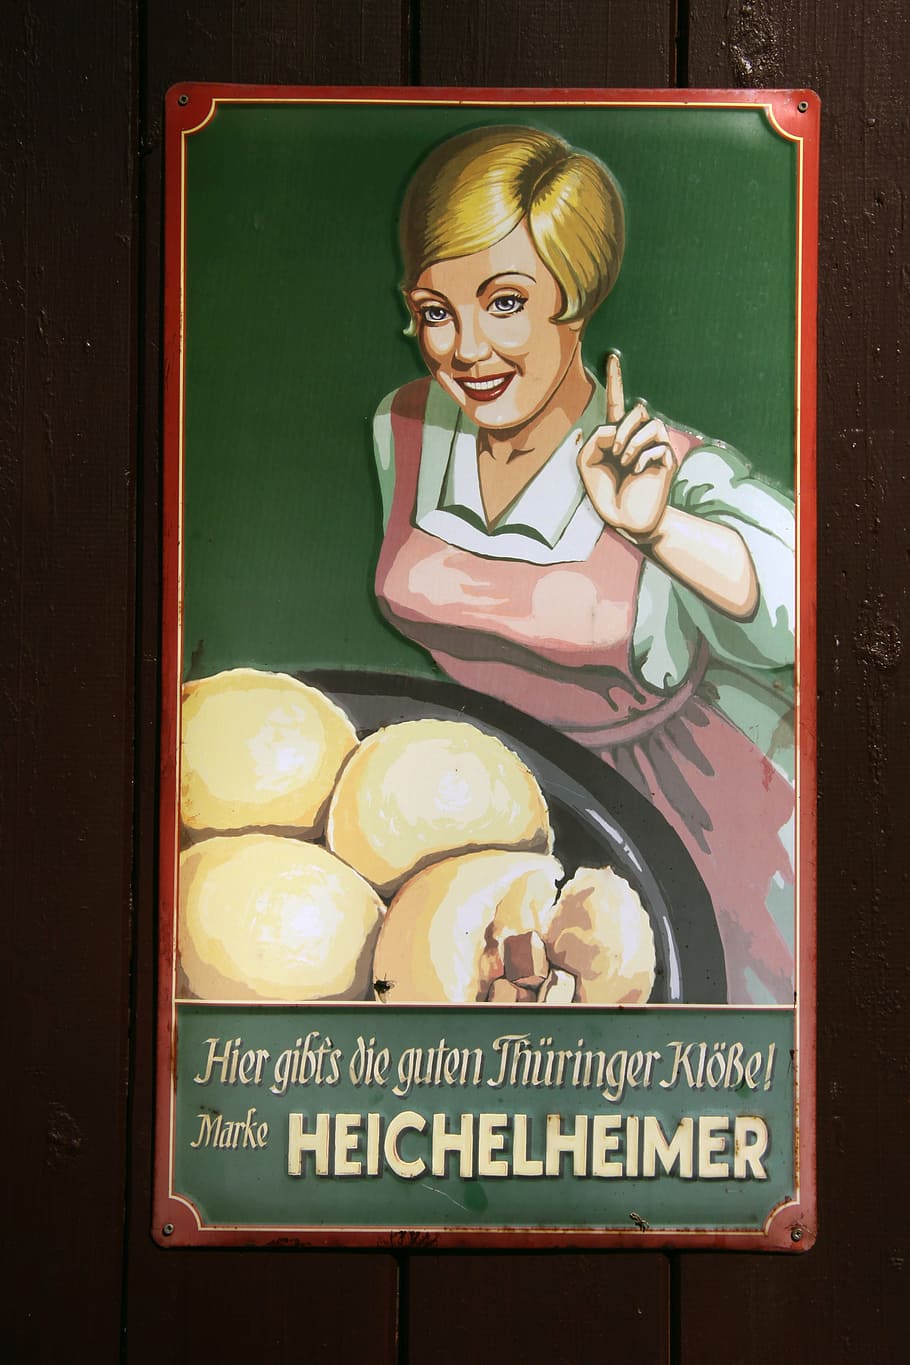 advertising sign, metal sheet, those days anno, kloßwerbung, advertising, metal sign, thuringian dumplings, heichelheimer, one person, young adult